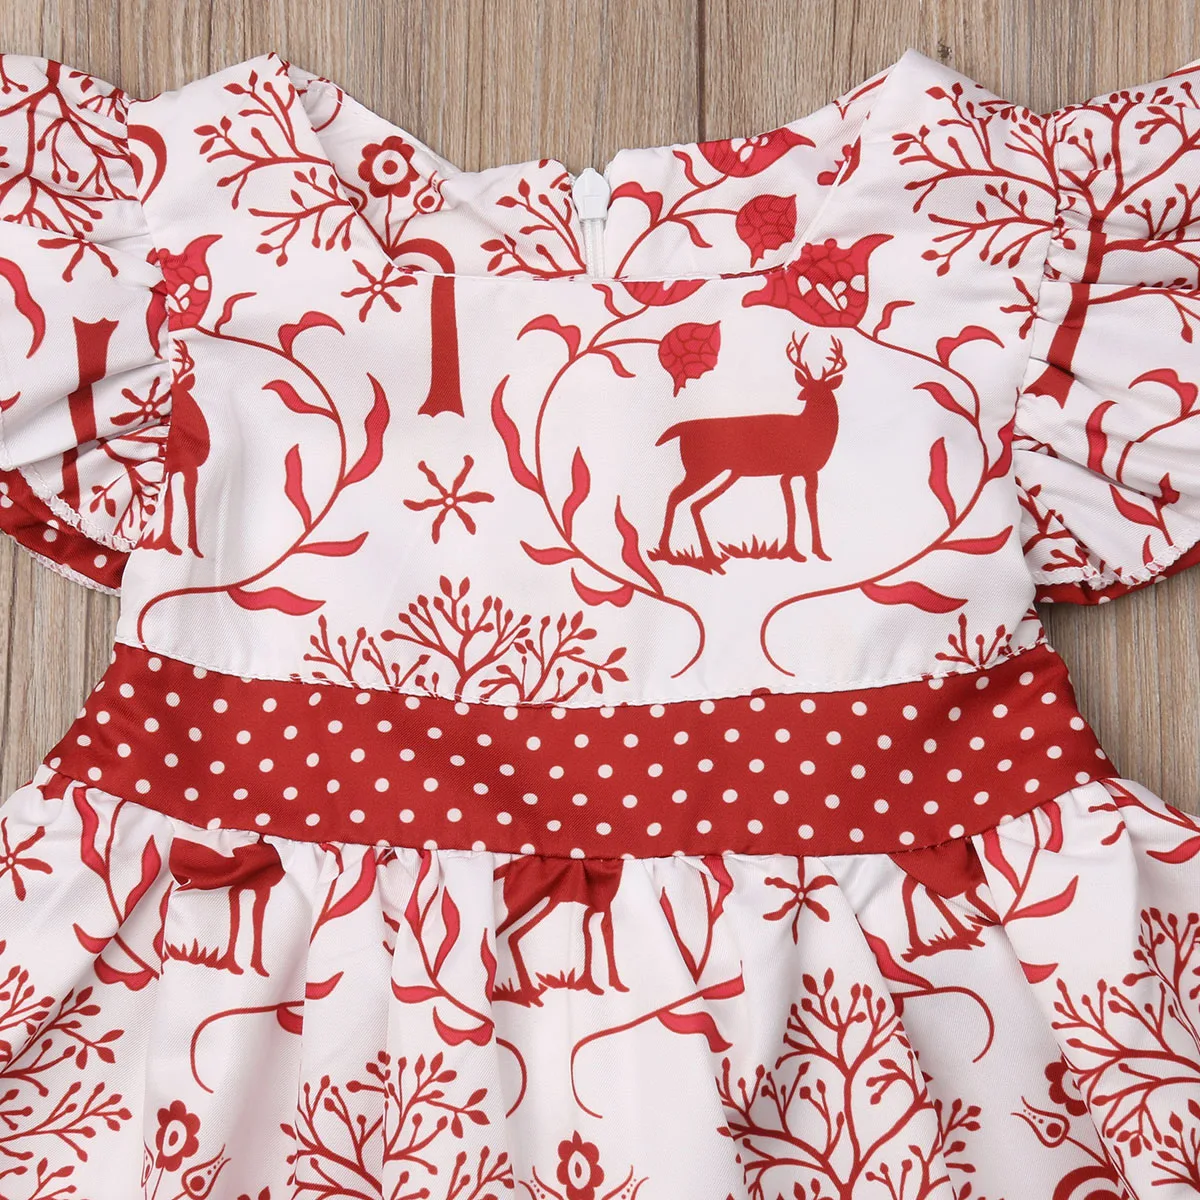 Pudcoco New Brand Christmas Newborn Kids Baby Girls Deer Bowknot Pageant Party Formal Dress